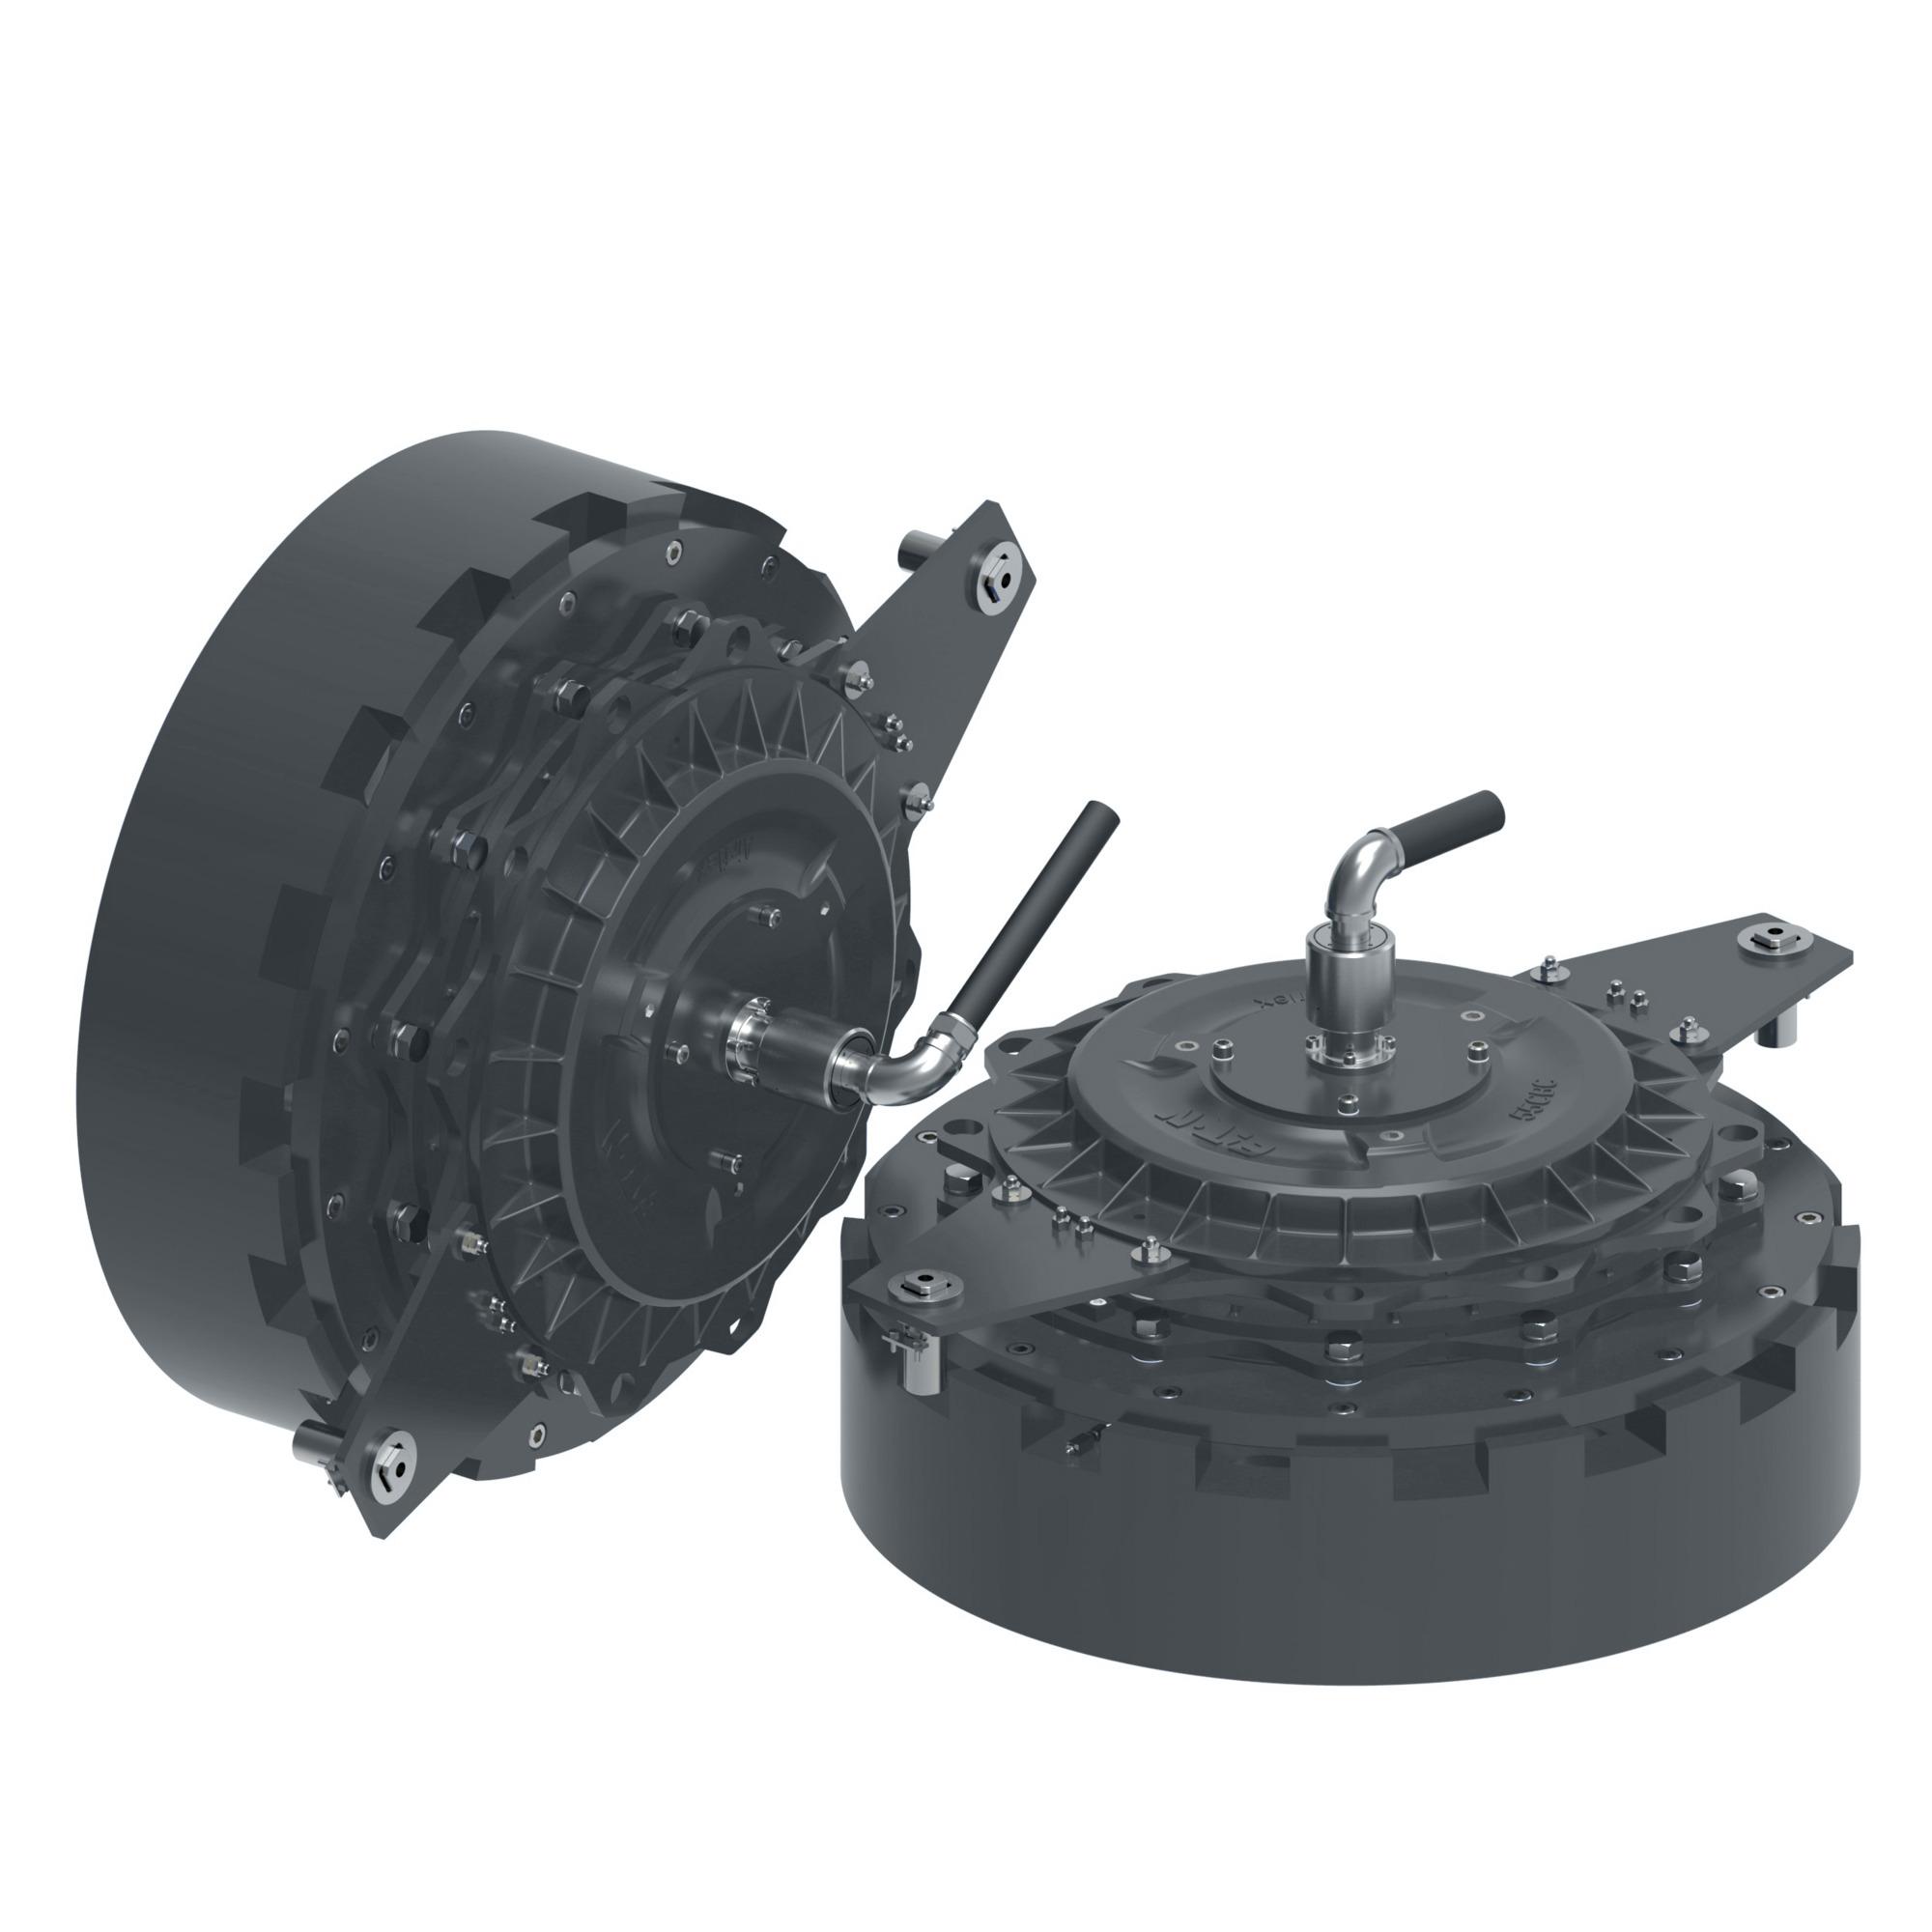 Combination clutch brake category image